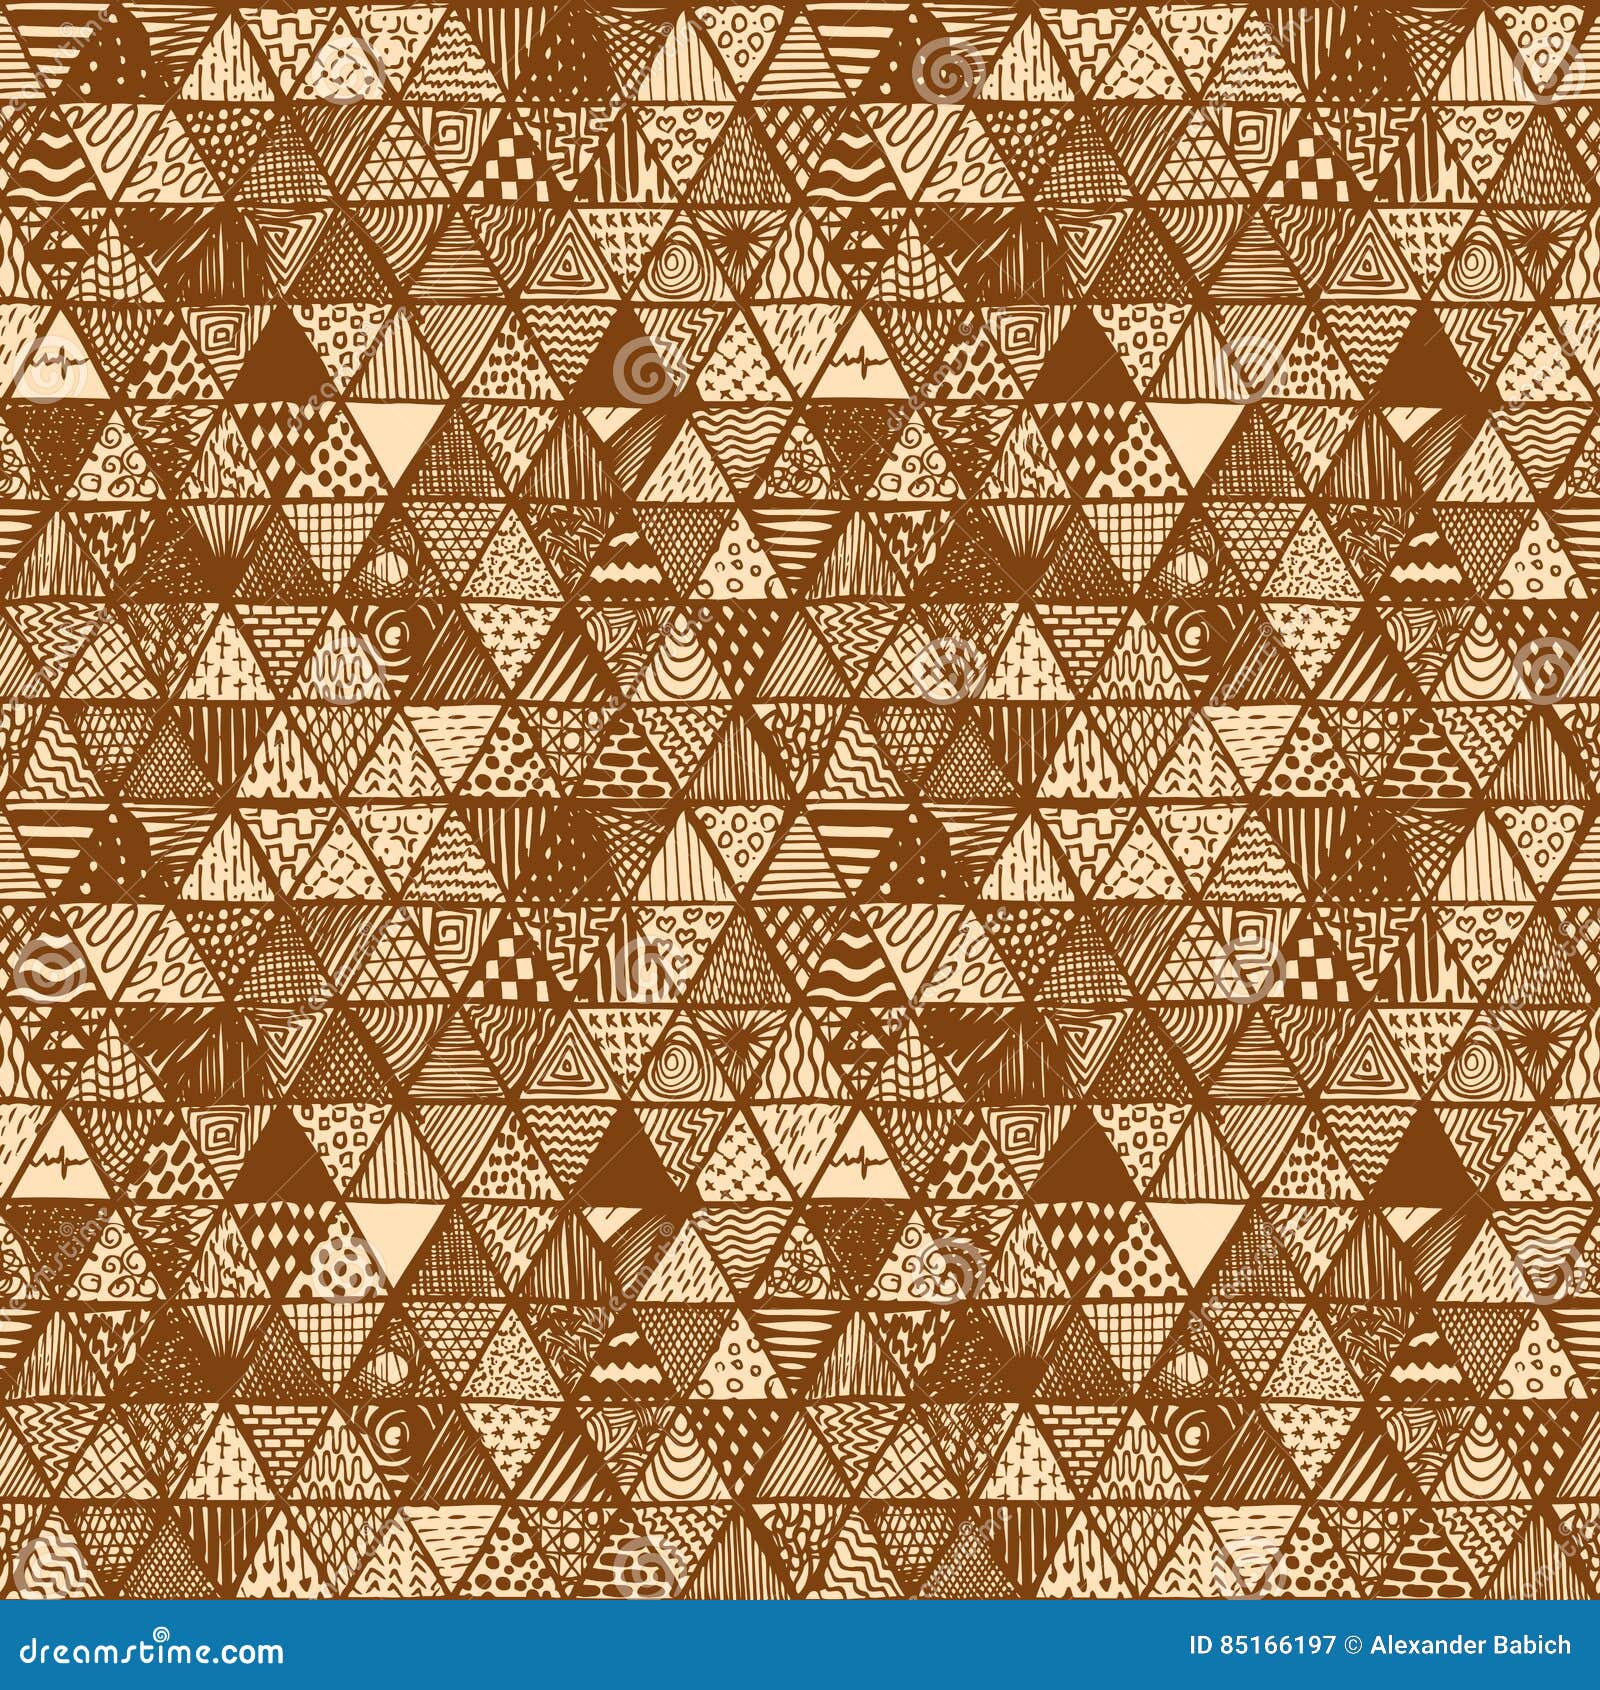 seamless pattern of equilateral triangles.